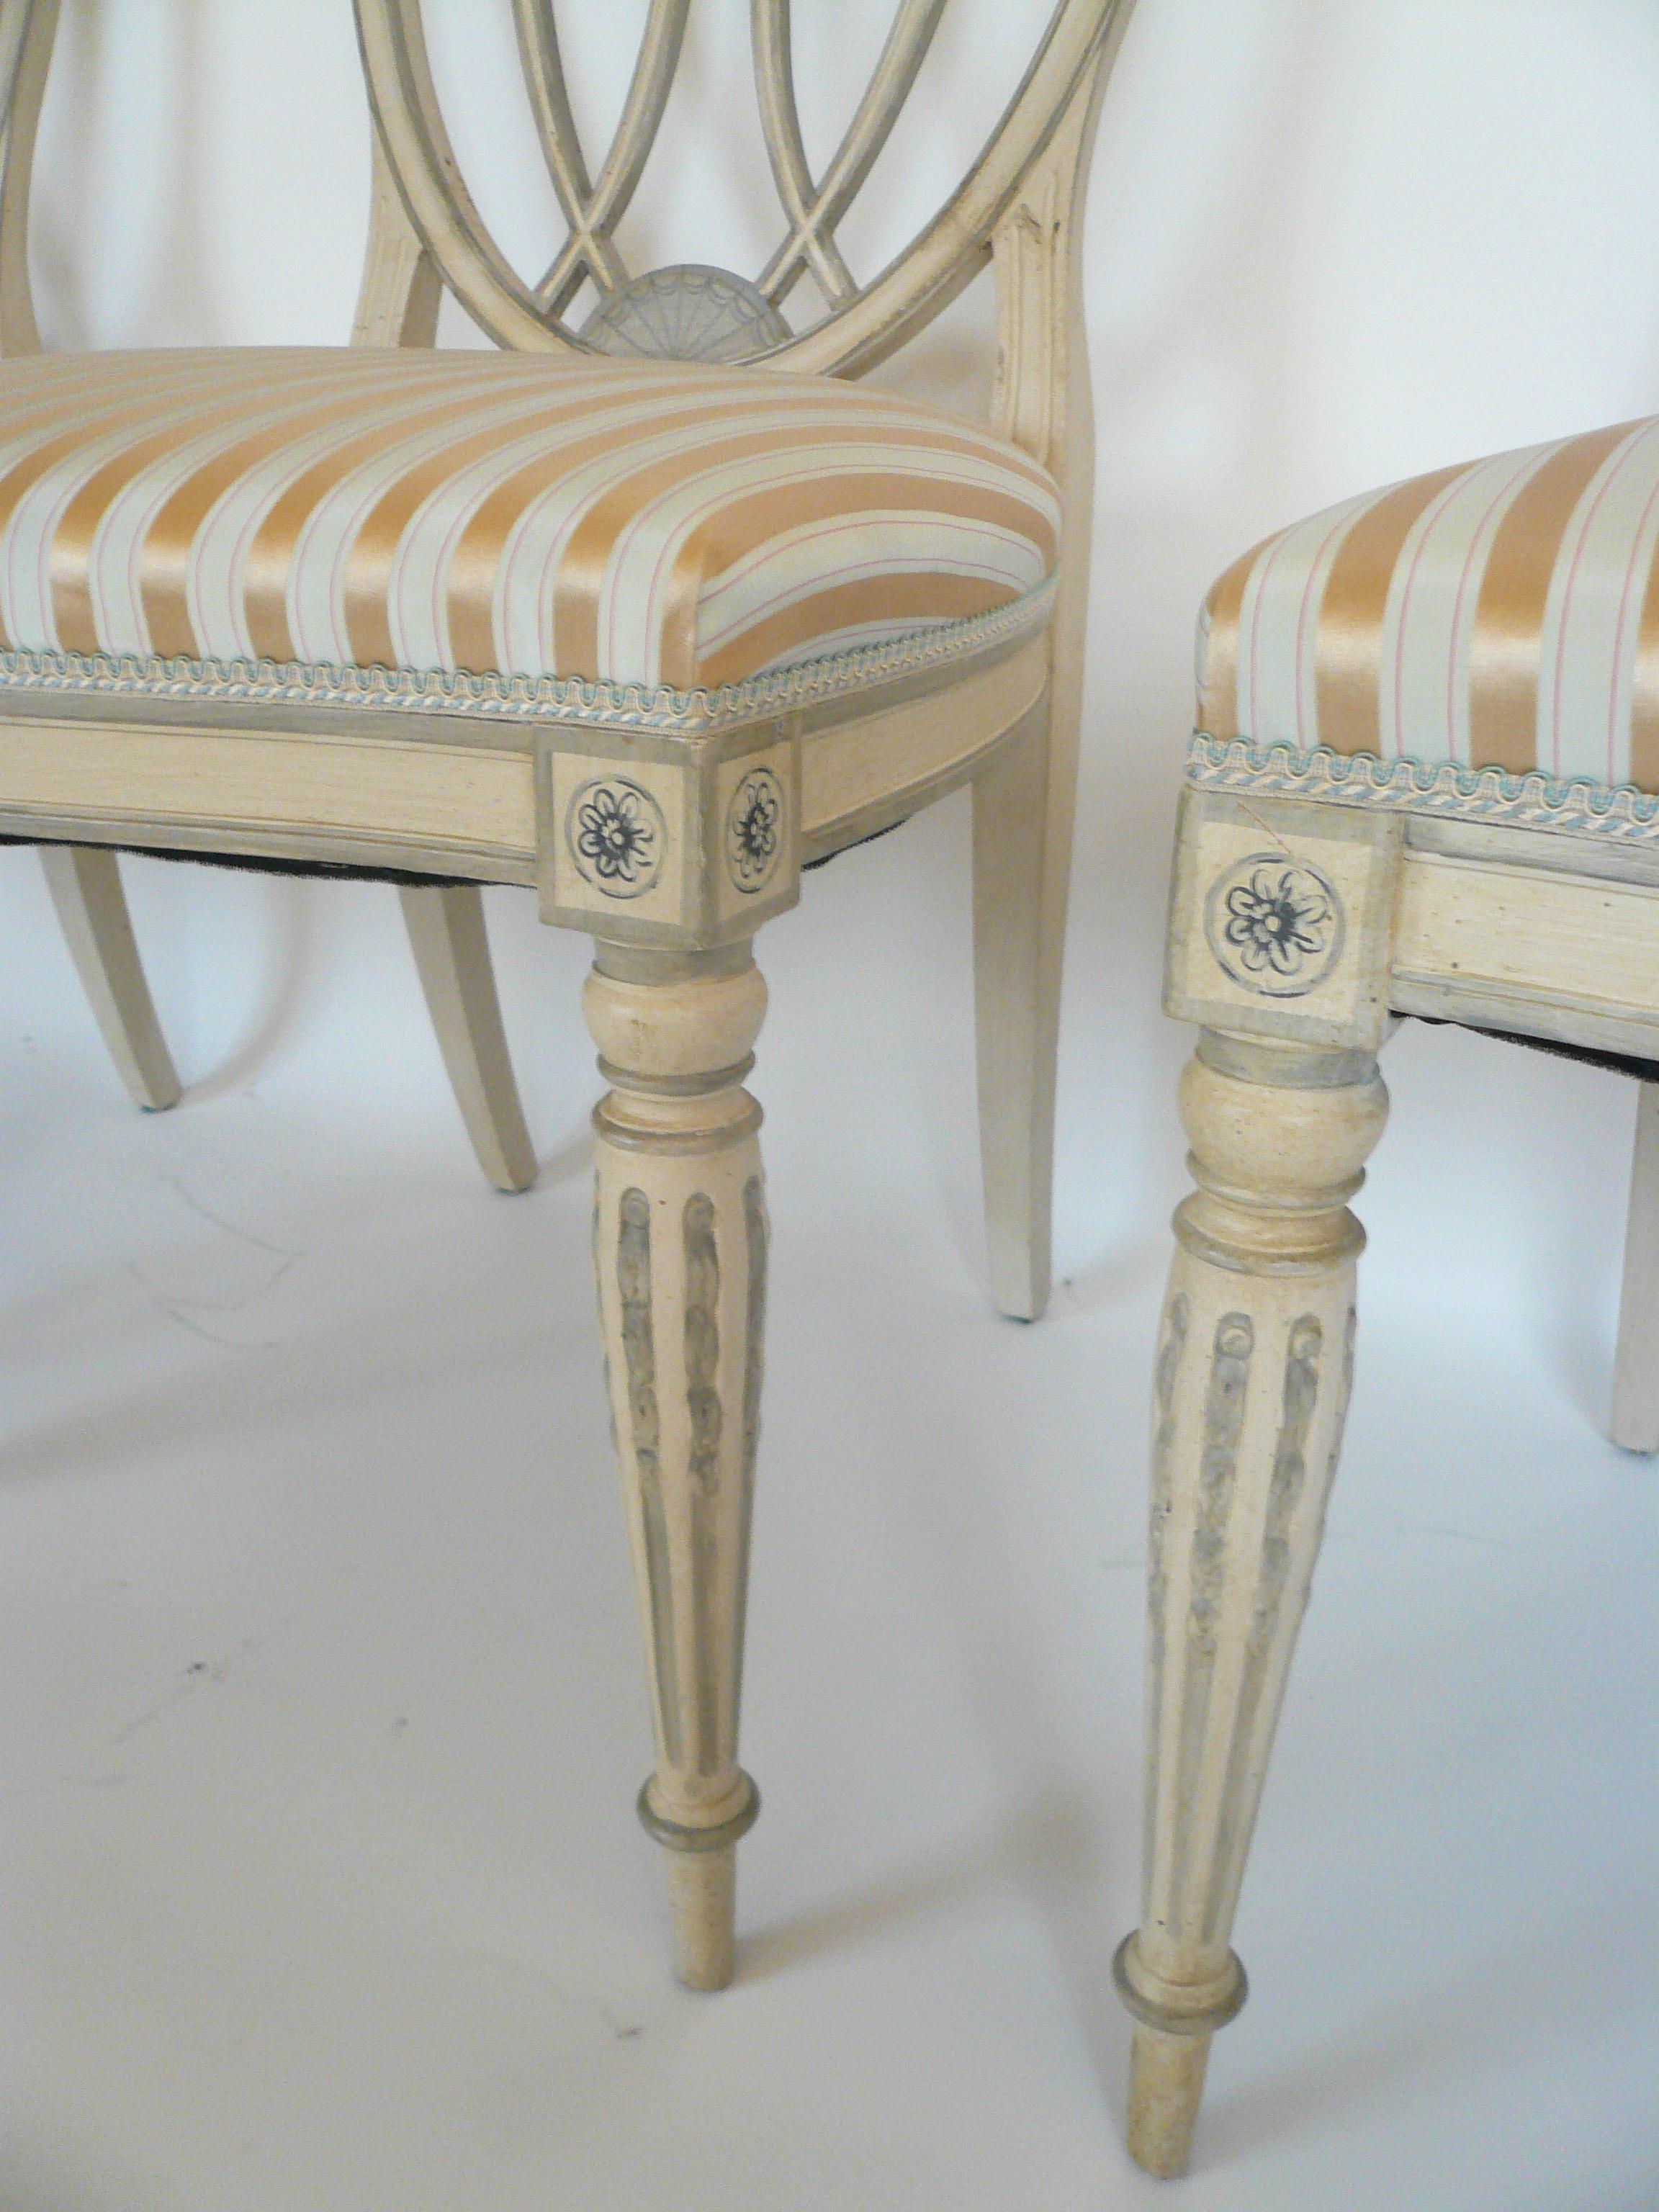 This finely painted set of 8 chairs consists of six side, and two armchairs and are upholstered in a Scalamandre silk stripe.
They feature Classically inspired painted landscapes and Robert Adam style motifs.